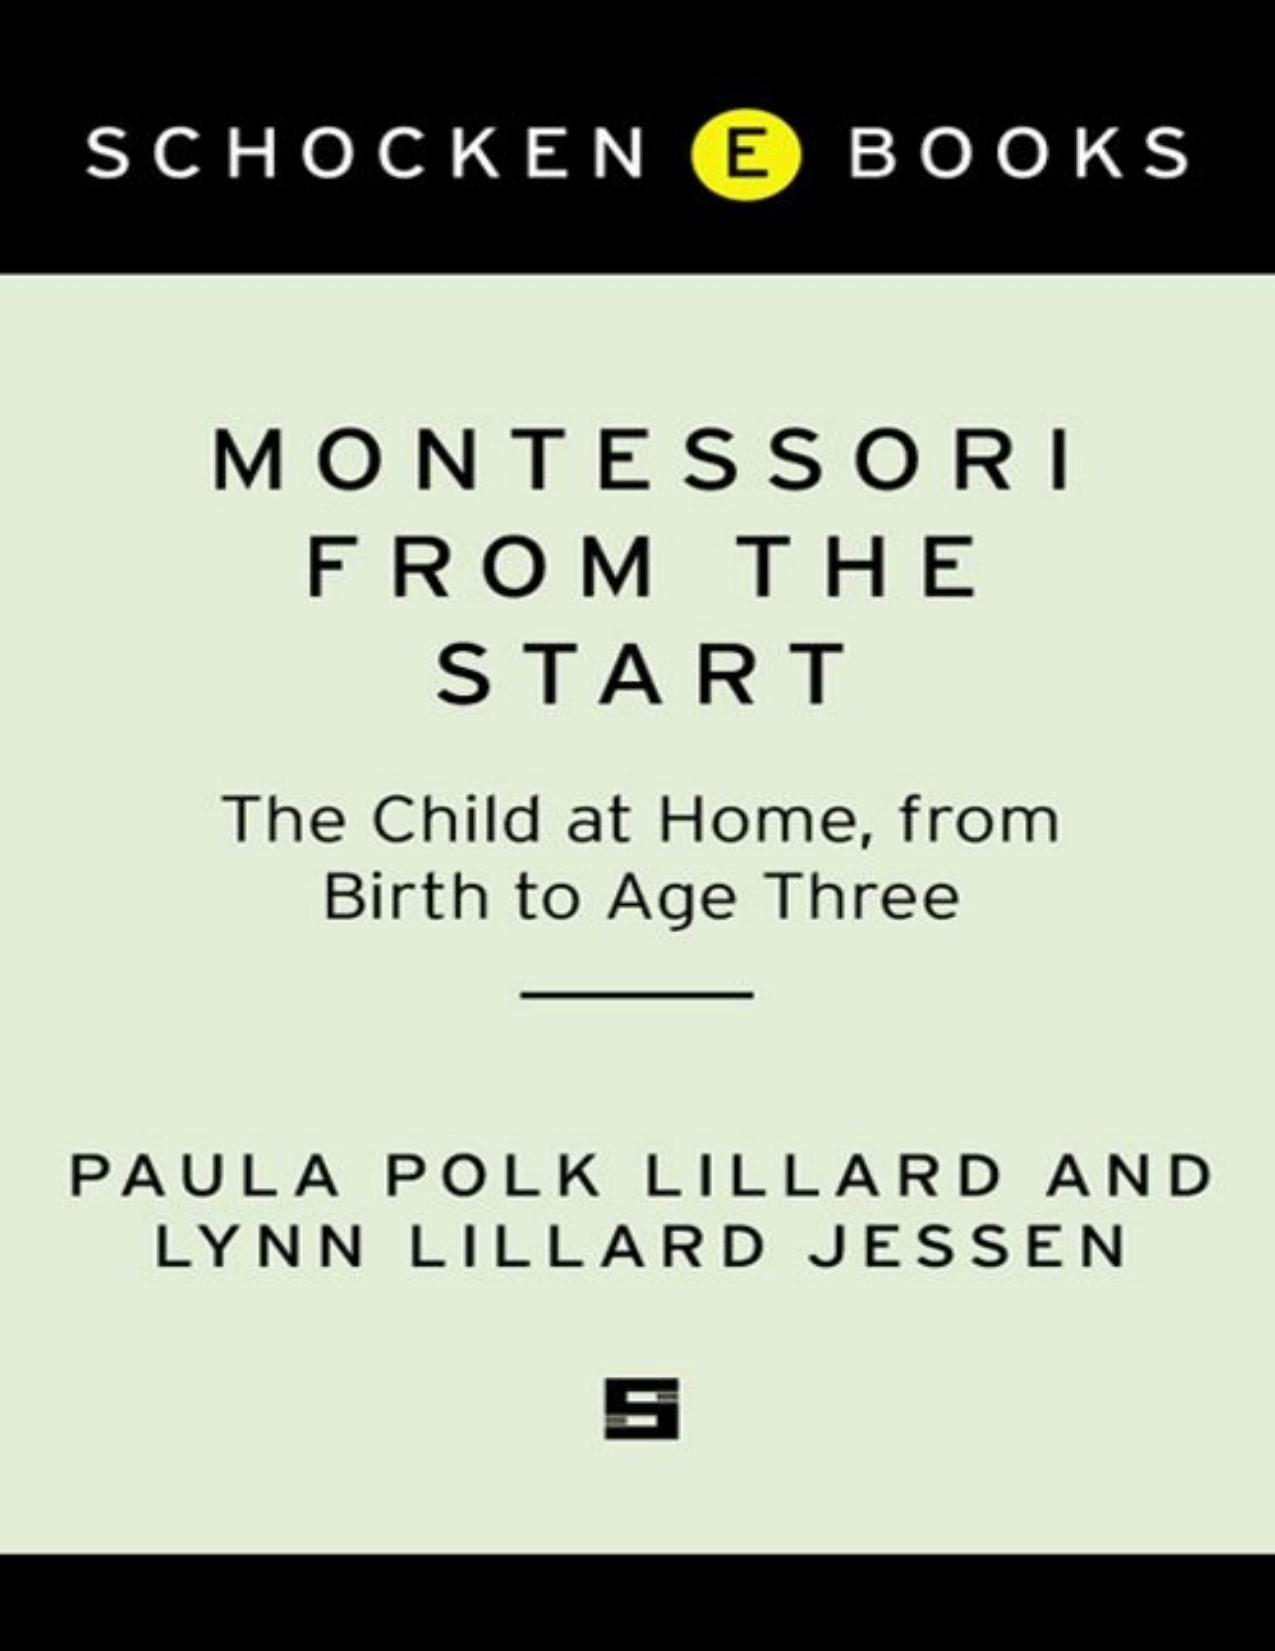 Montessori from the Start: The Child at Home, from Birth to Age Three - PDFDrive.com